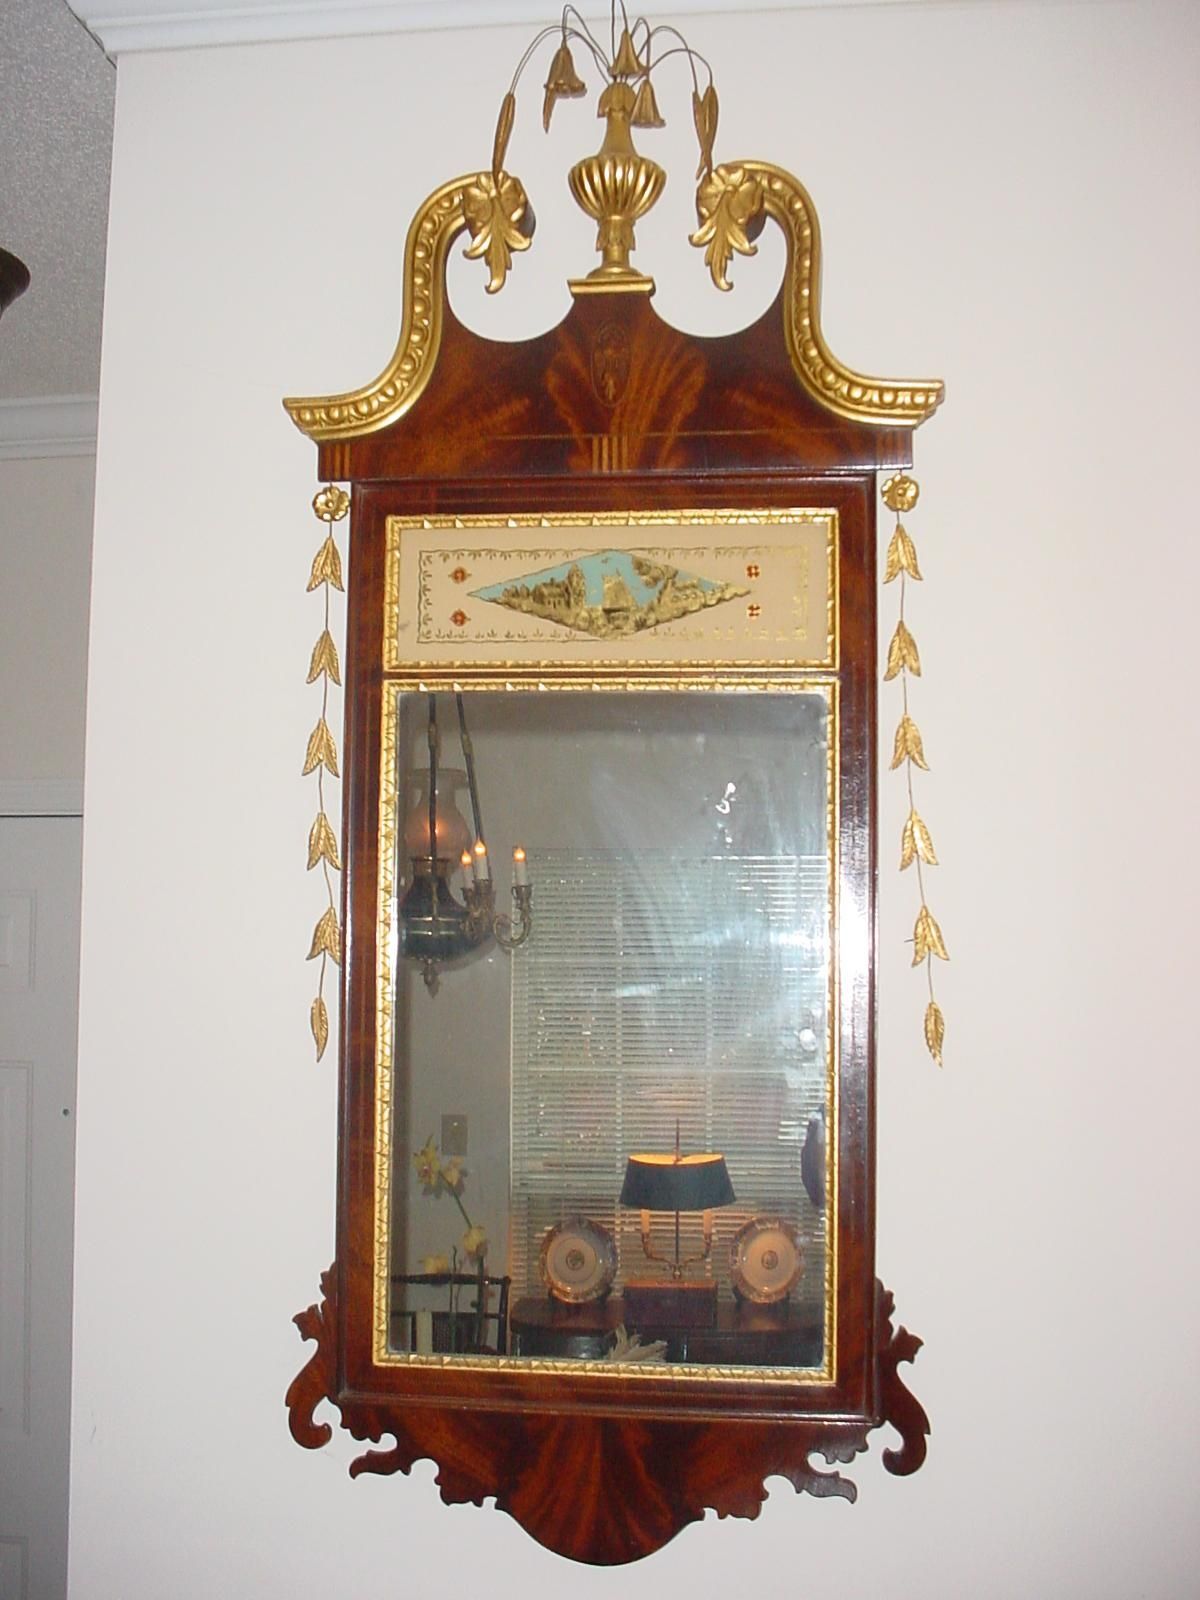 An American Federal Style Hepplewhite Mirror For Sale | Antiques In Antique Mirror For Sale (Photo 11 of 20)